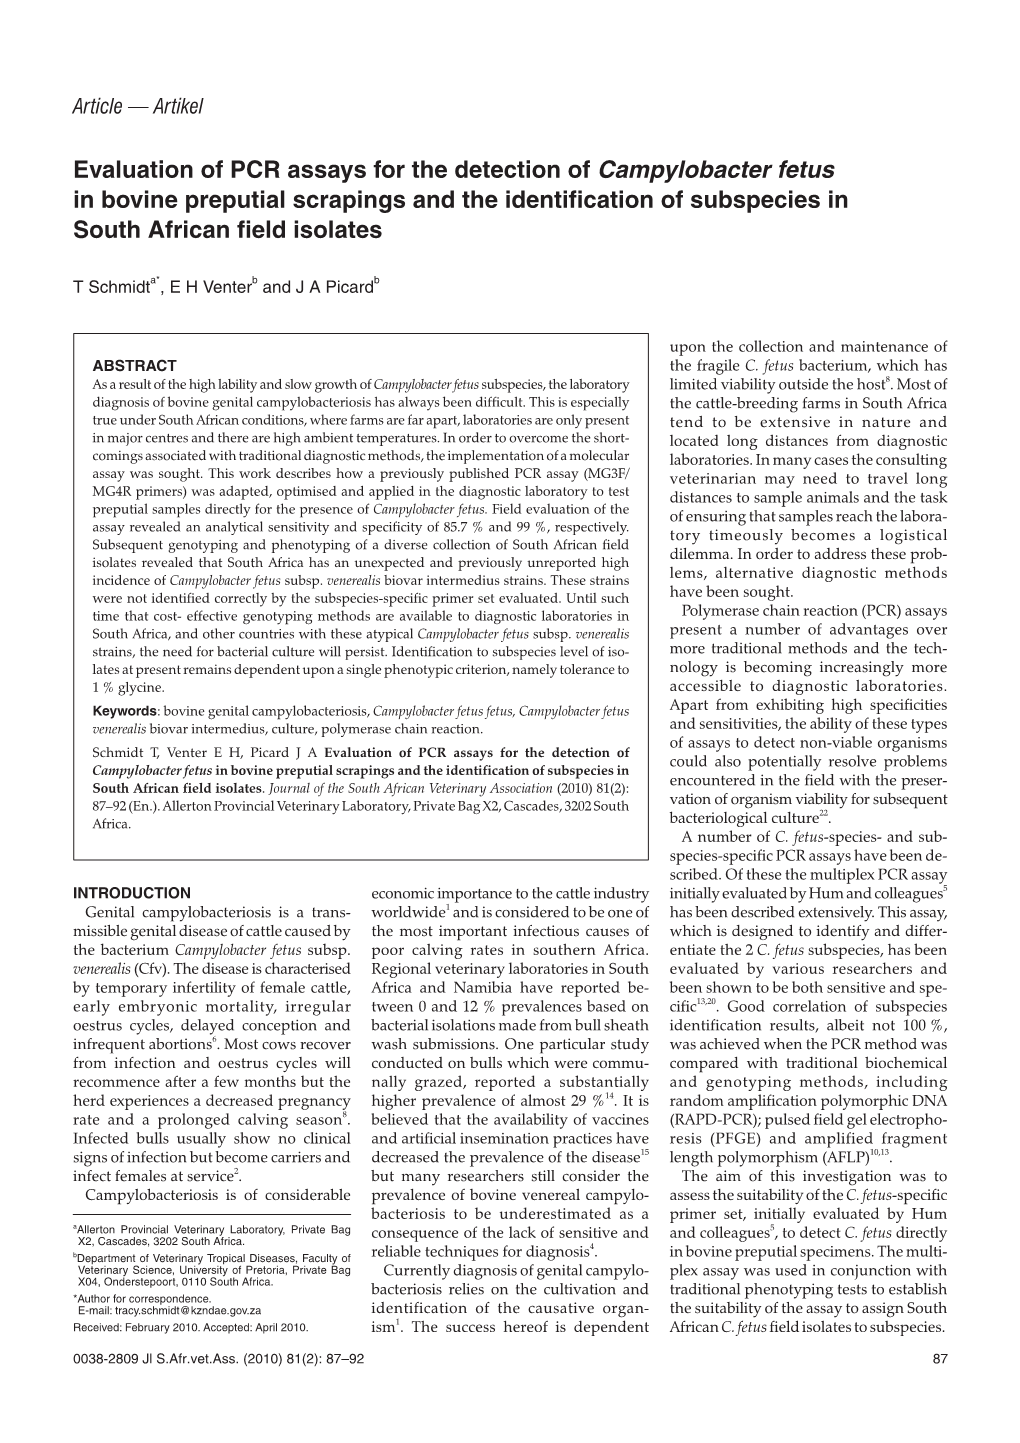 Evaluation of PCR Assays for the Detection of Campylobacter Fetus in Bovine Preputial Scrapings and the Identification of Subspecies in South African Field Isolates